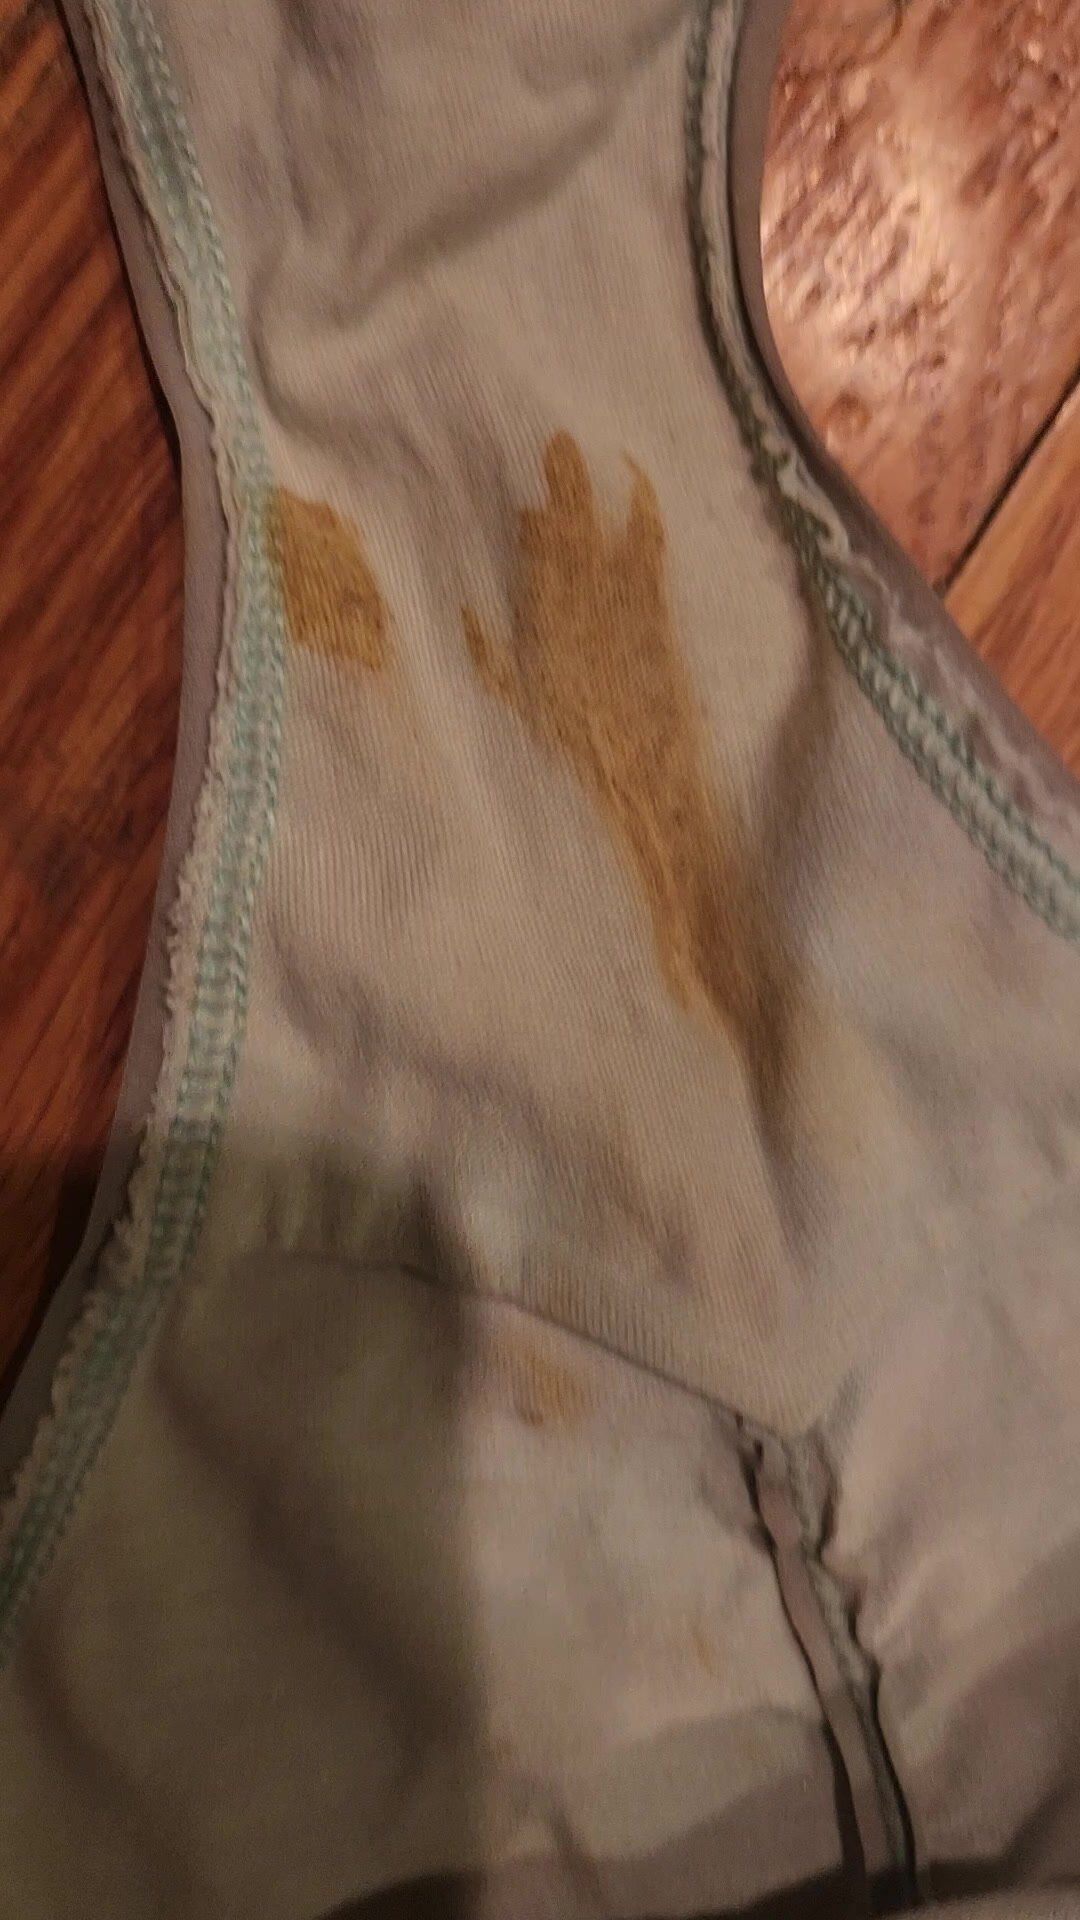 Wife's dirty panty after work